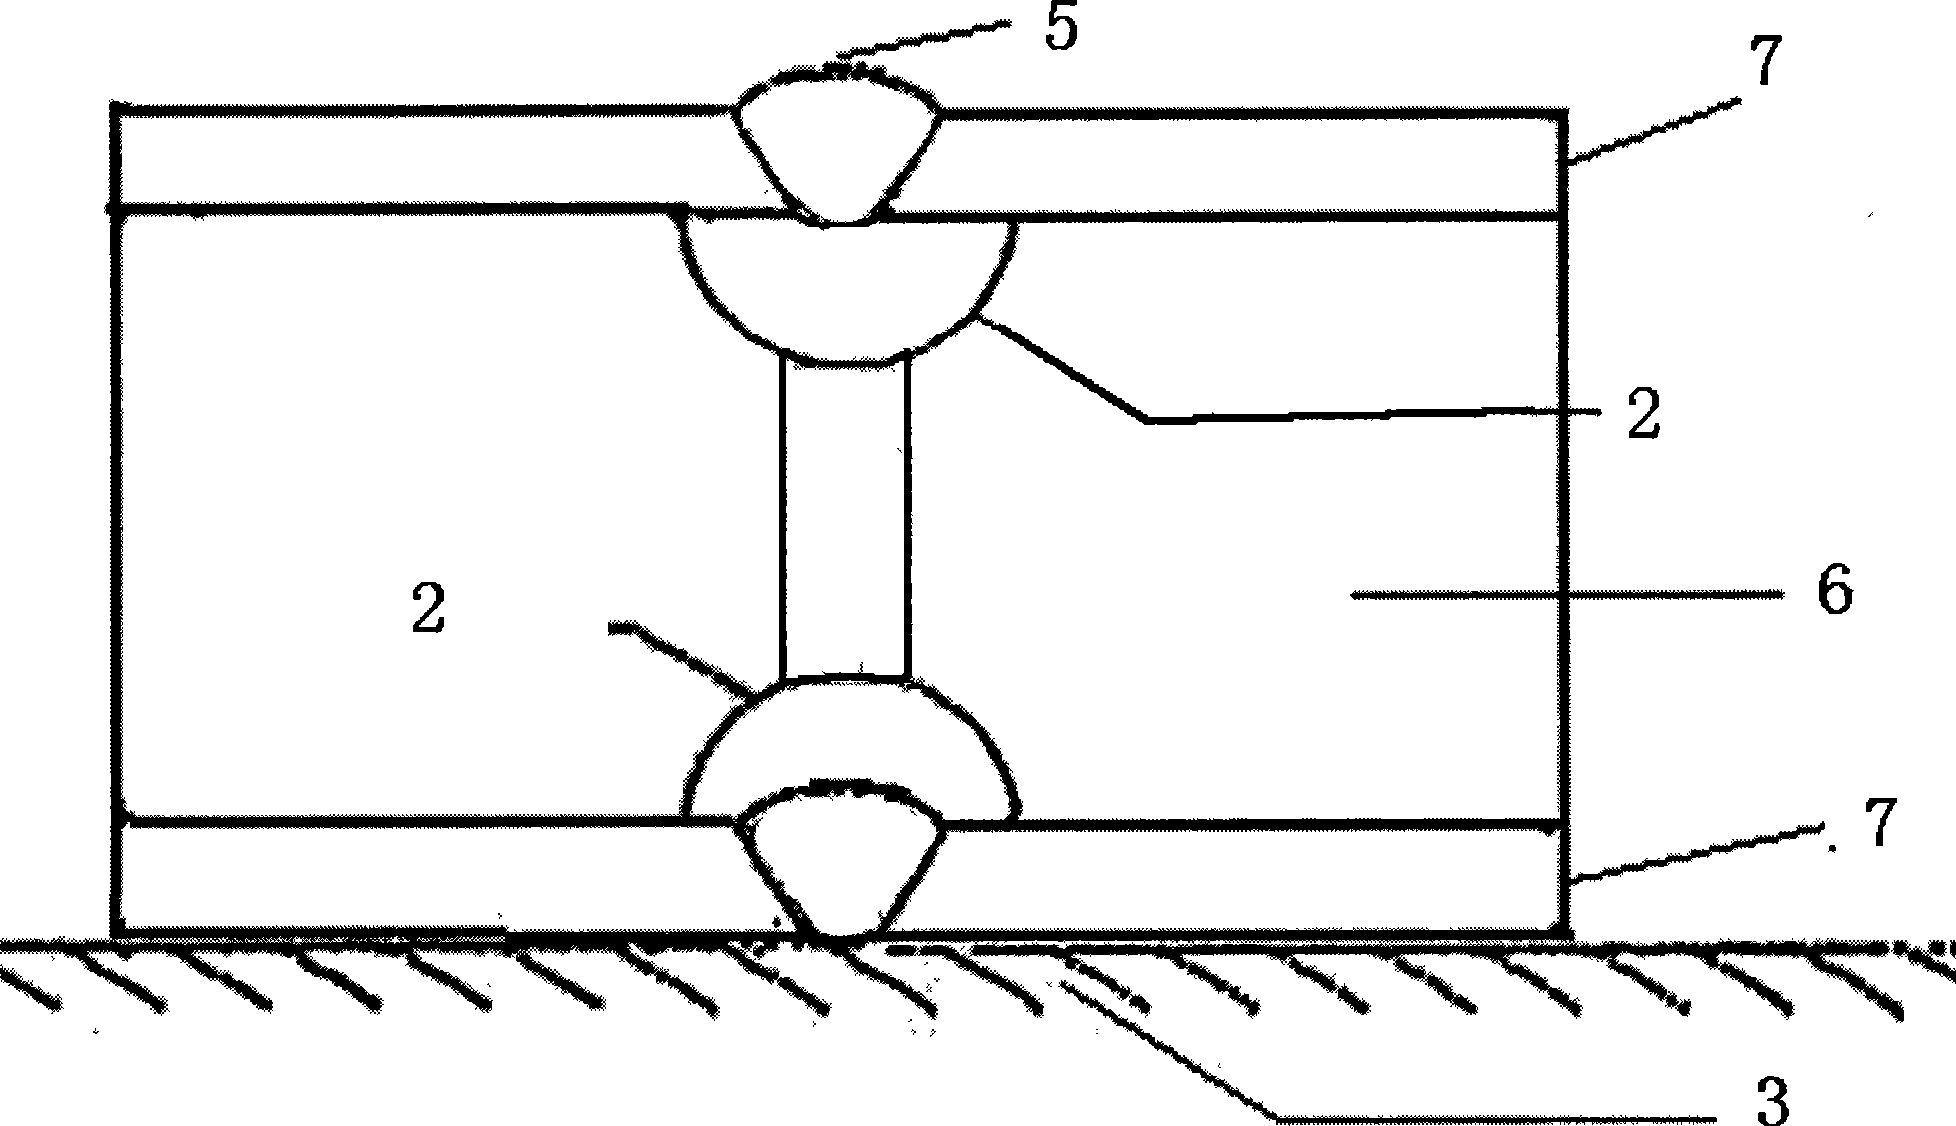 Supersonic inspection method for profiled bar overwelded hole welding joint